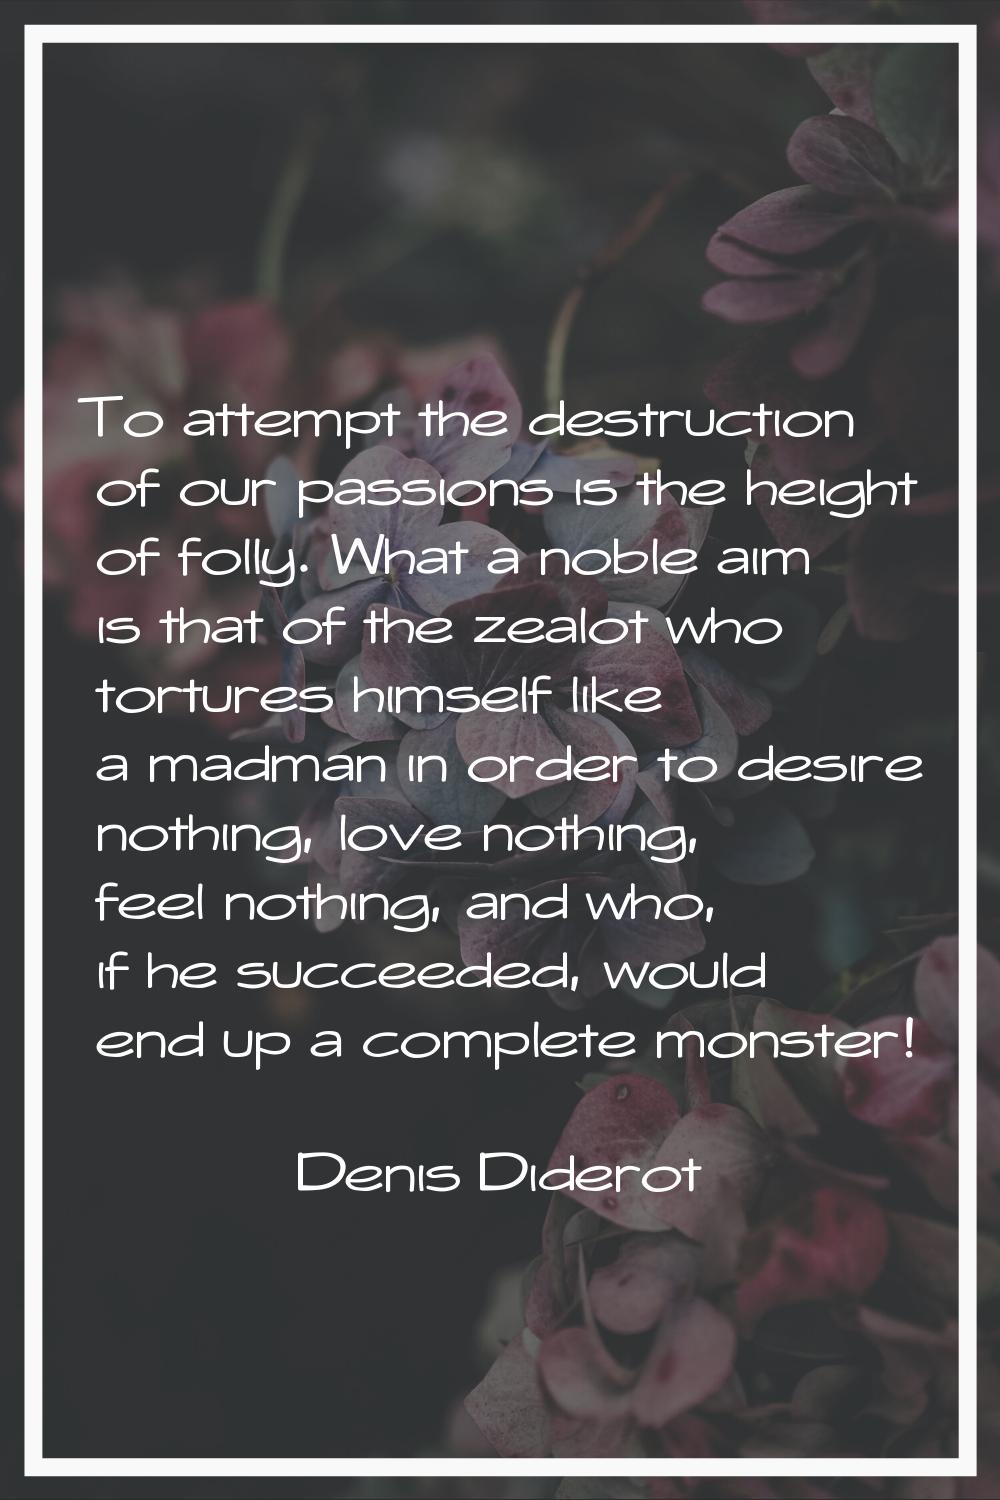 To attempt the destruction of our passions is the height of folly. What a noble aim is that of the 